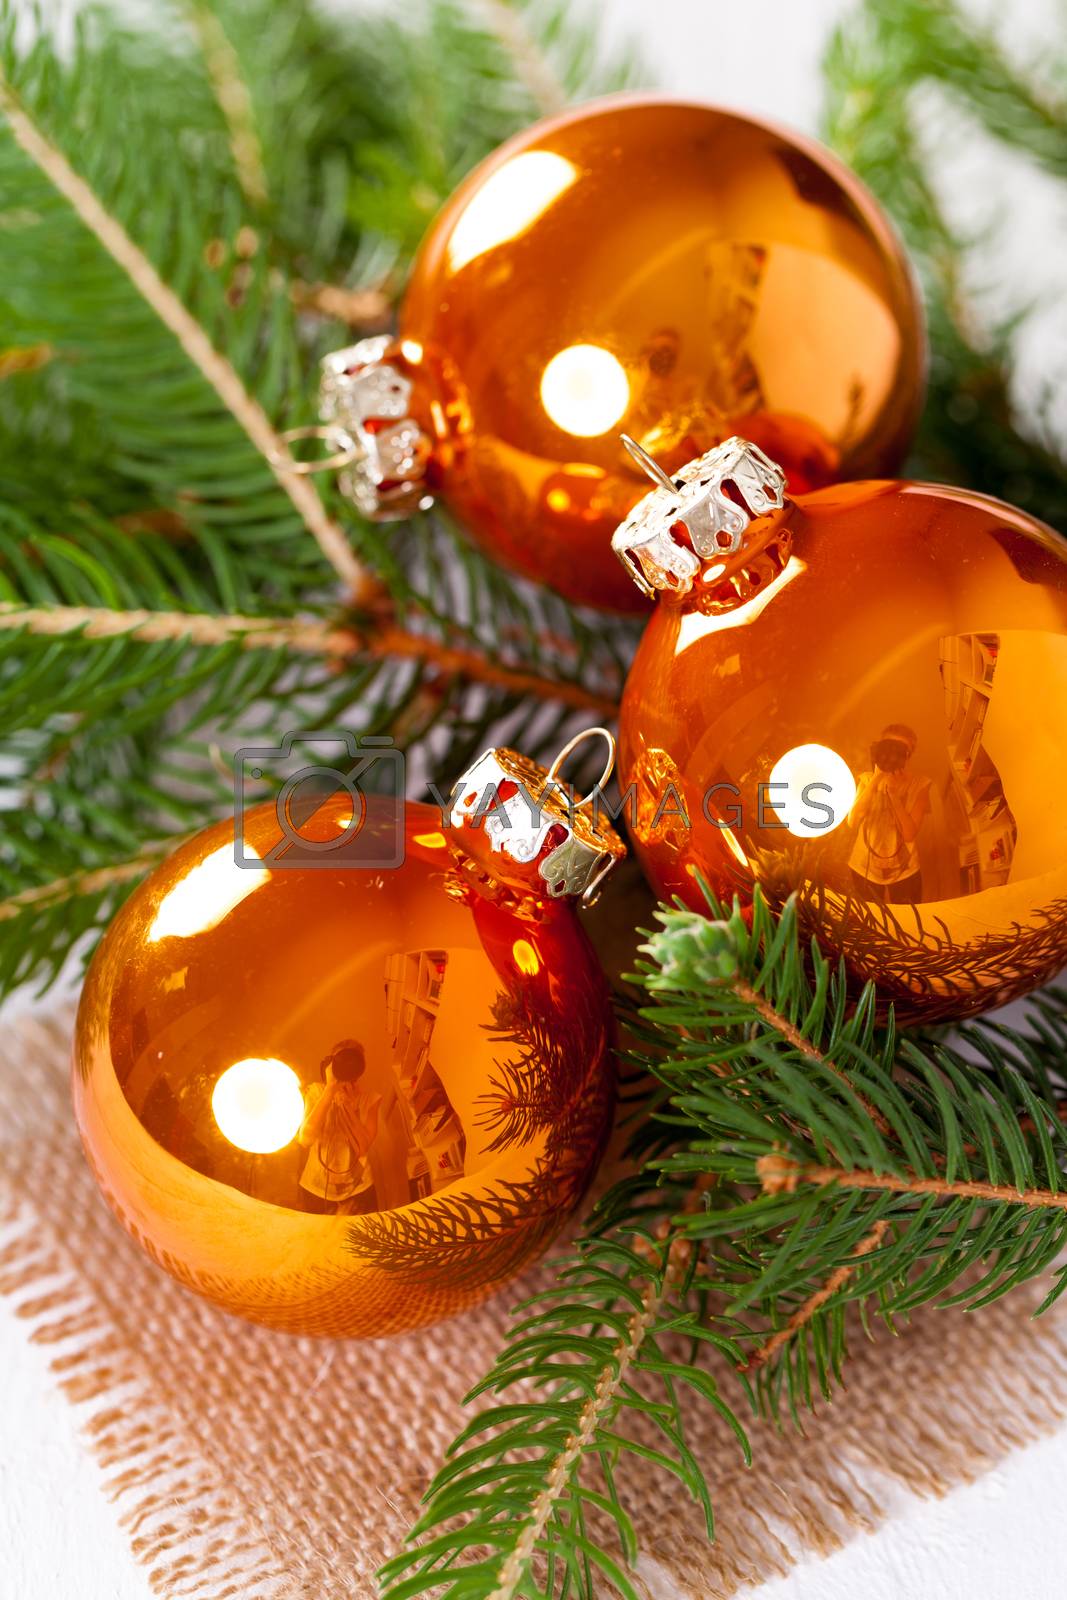 Royalty free image of Shiny bright copper colored Christmas balls by juniart